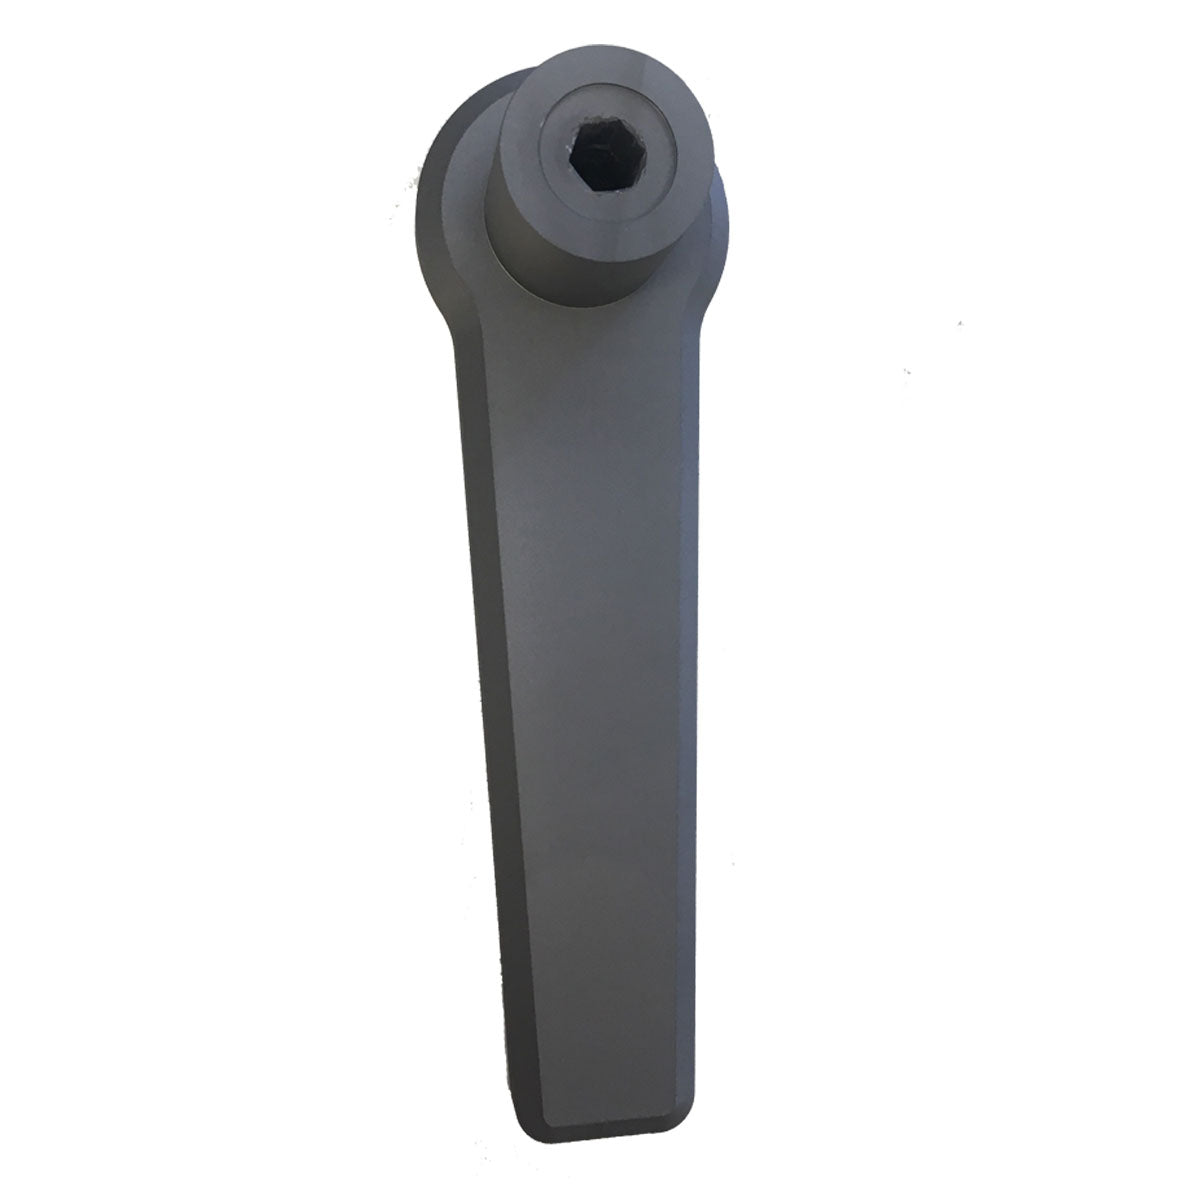 Malibu 19' Tower Handle - Only G3-17 Gray Anodized - 5550203